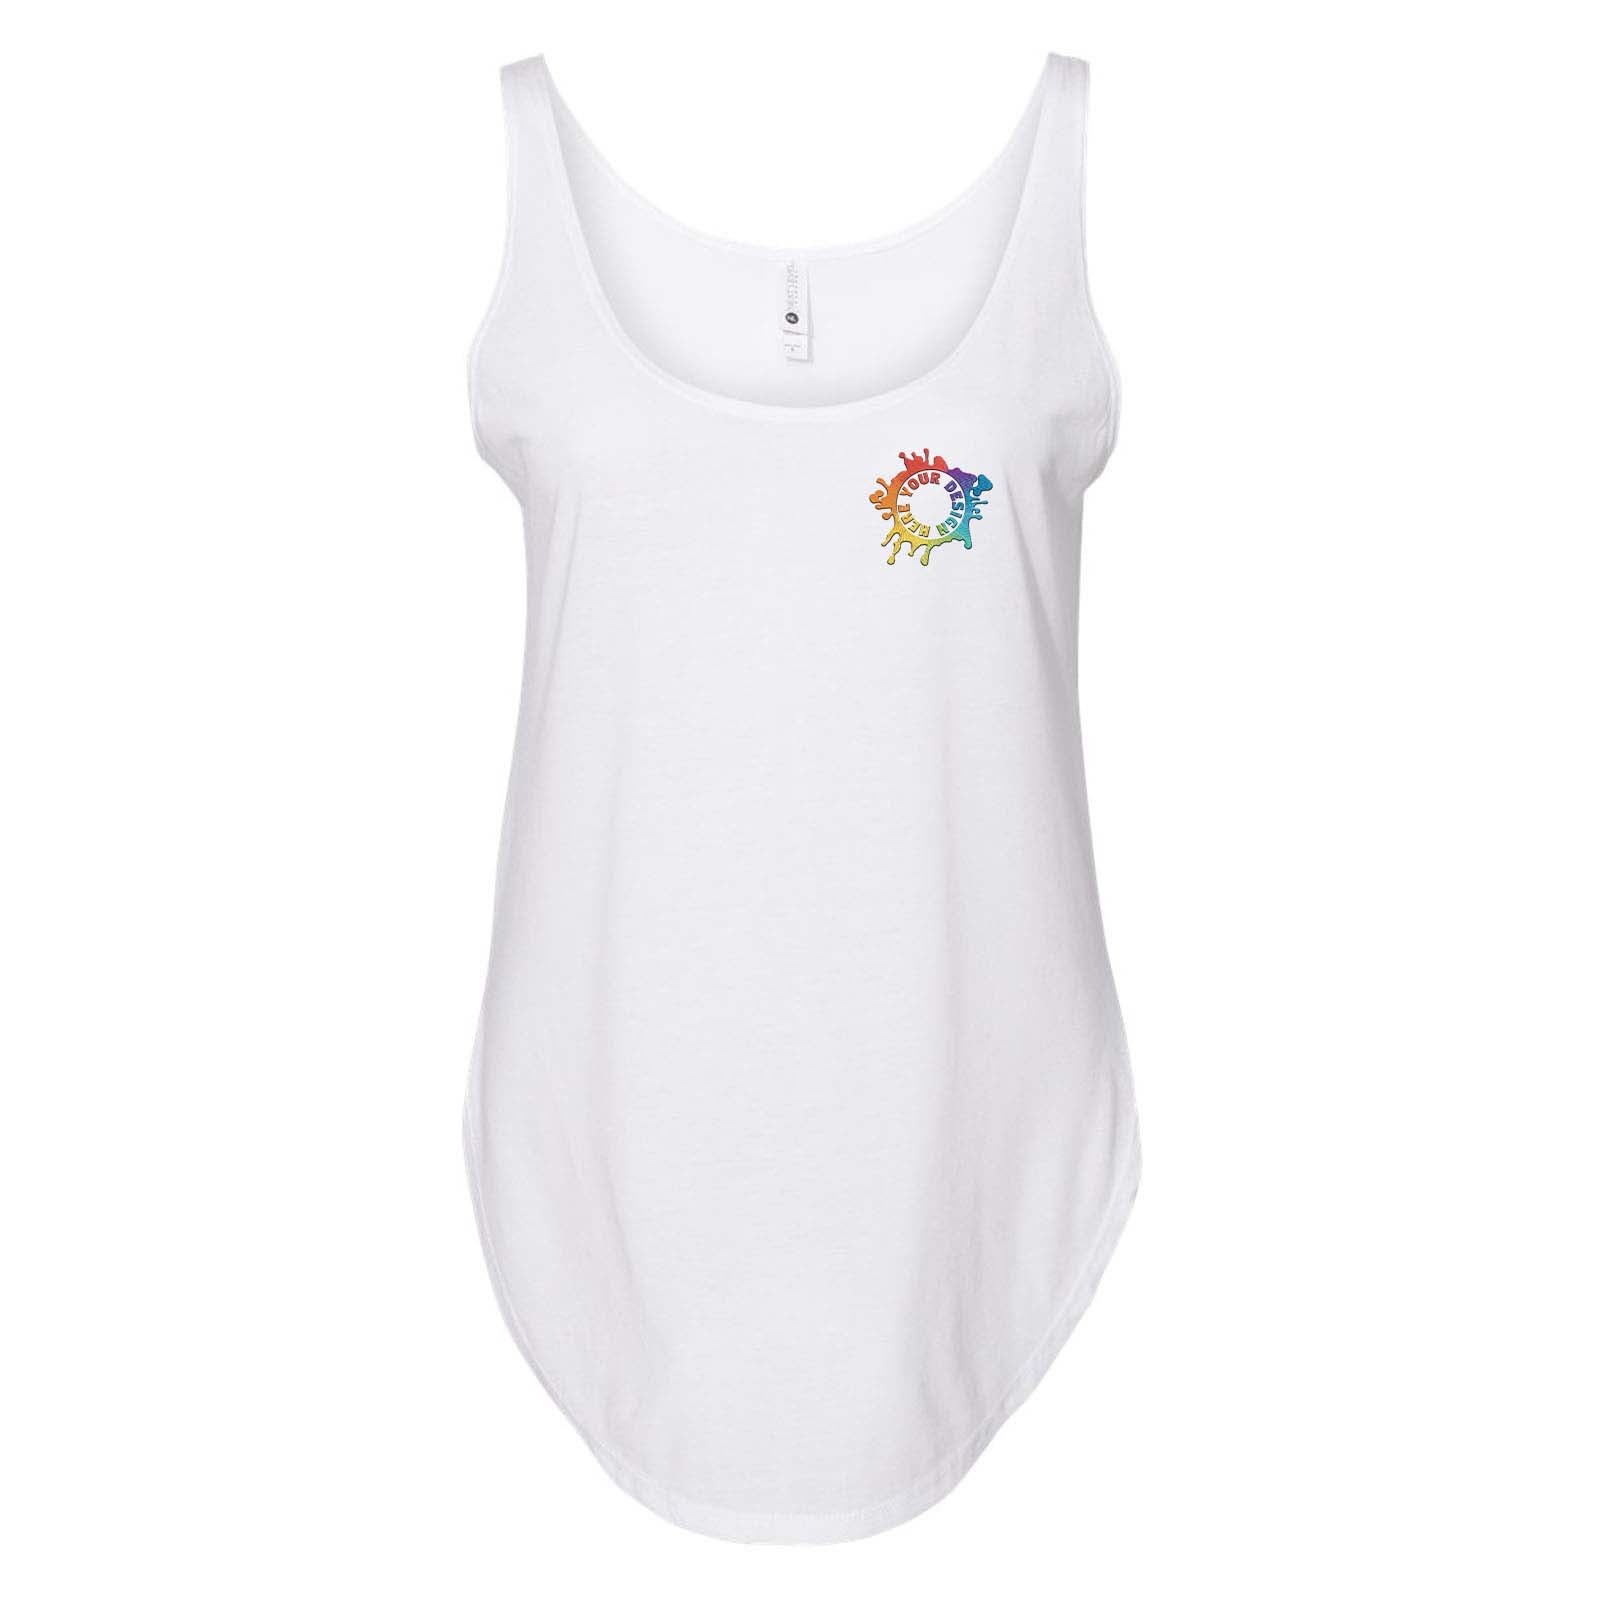 Next Level Women's Polyester/Cotton Blend Festival Tank Top Embroidery - Mato & Hash